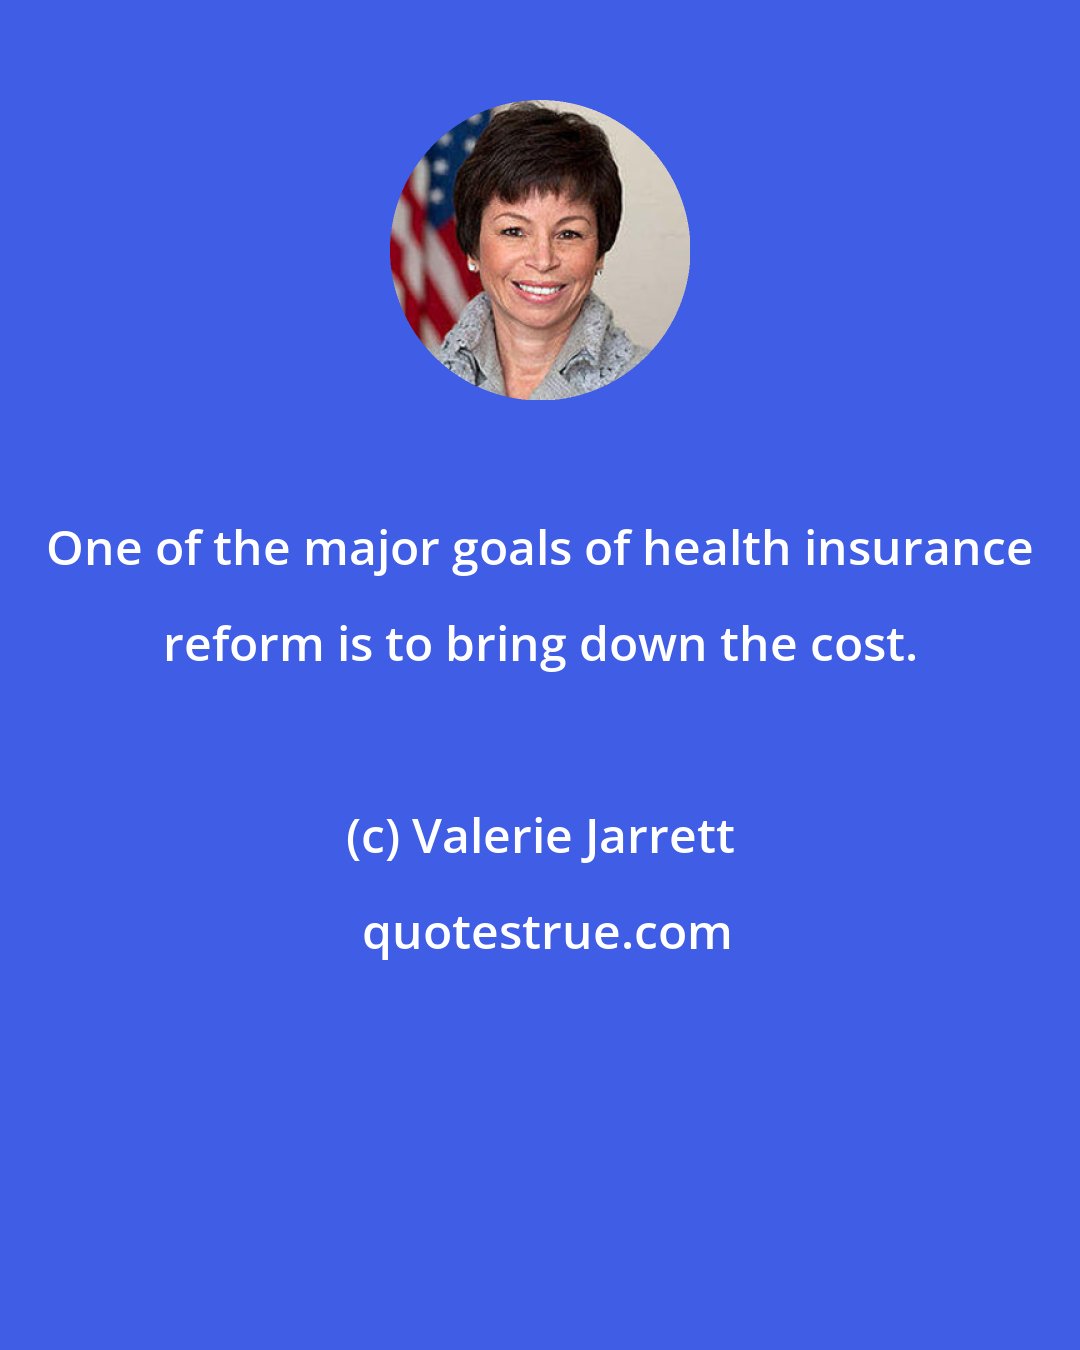 Valerie Jarrett: One of the major goals of health insurance reform is to bring down the cost.